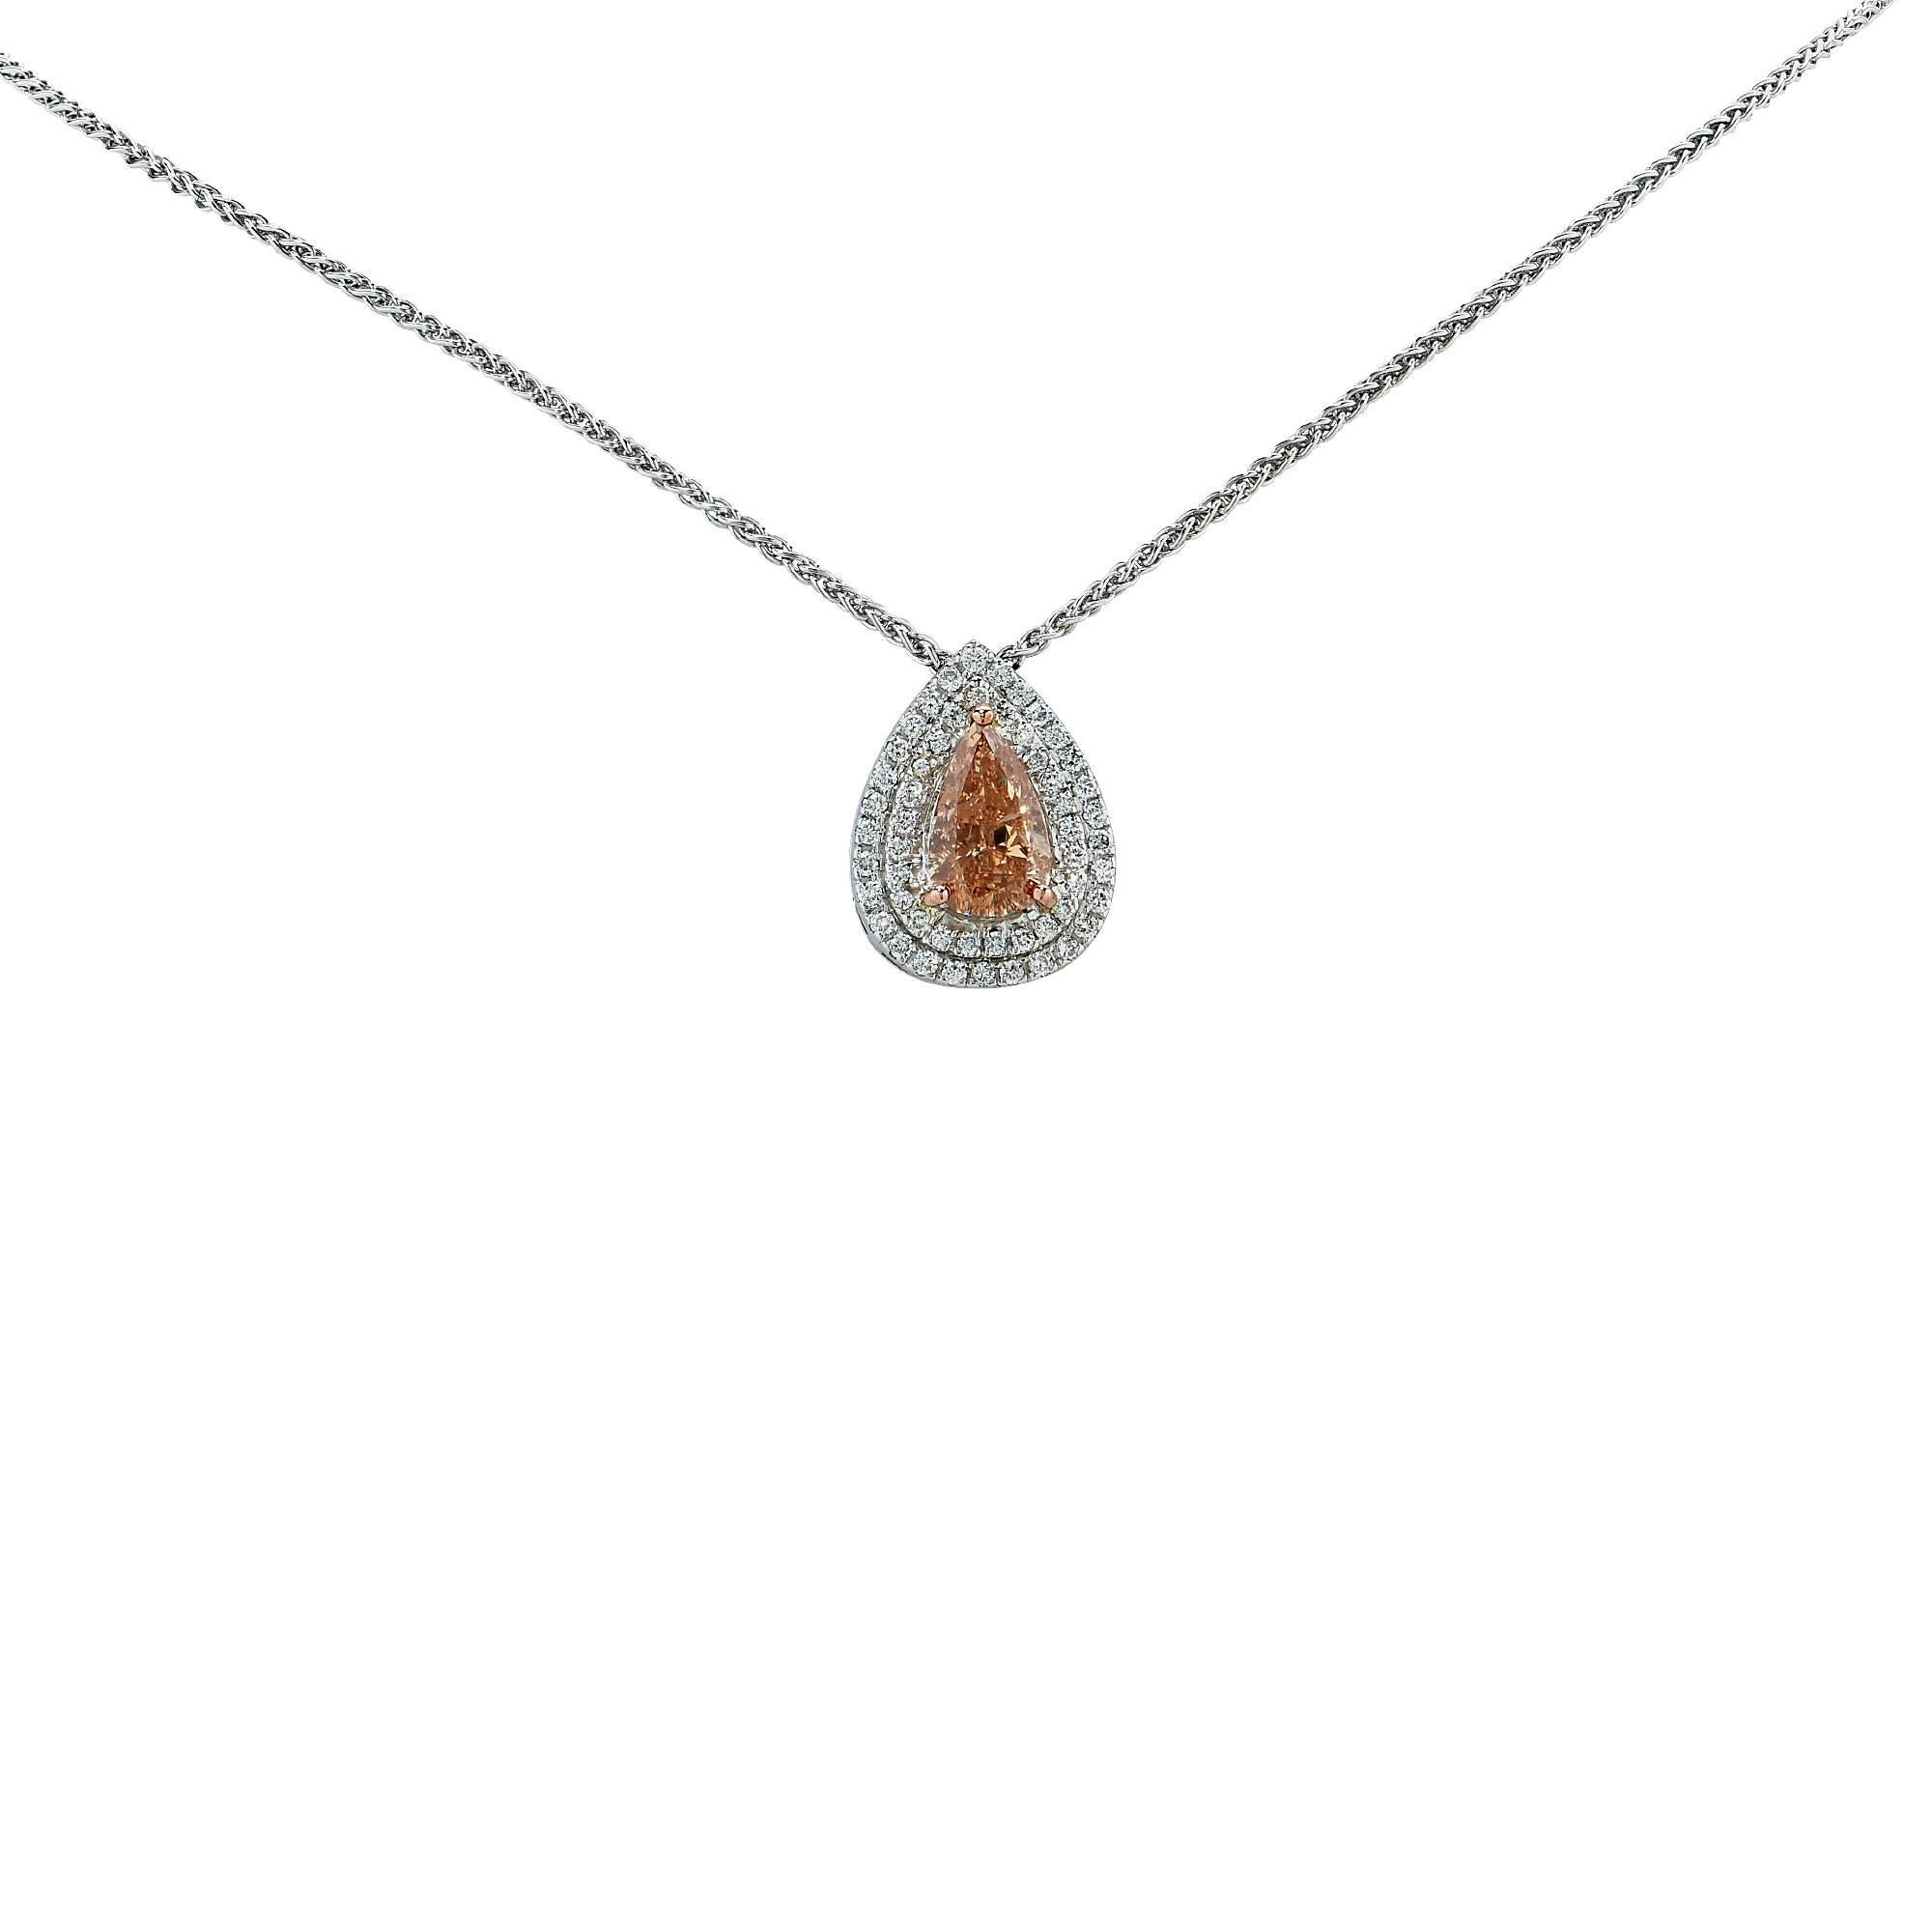 18k white gold necklace featuring a 1.69ct natural fancy brown-orange GIA graded pear shape diamond accented by 53 round brilliant cut diamonds weighing .39cts total, G color, VS clarity.

It is stamped and tested as 18k gold.
The metal weight is